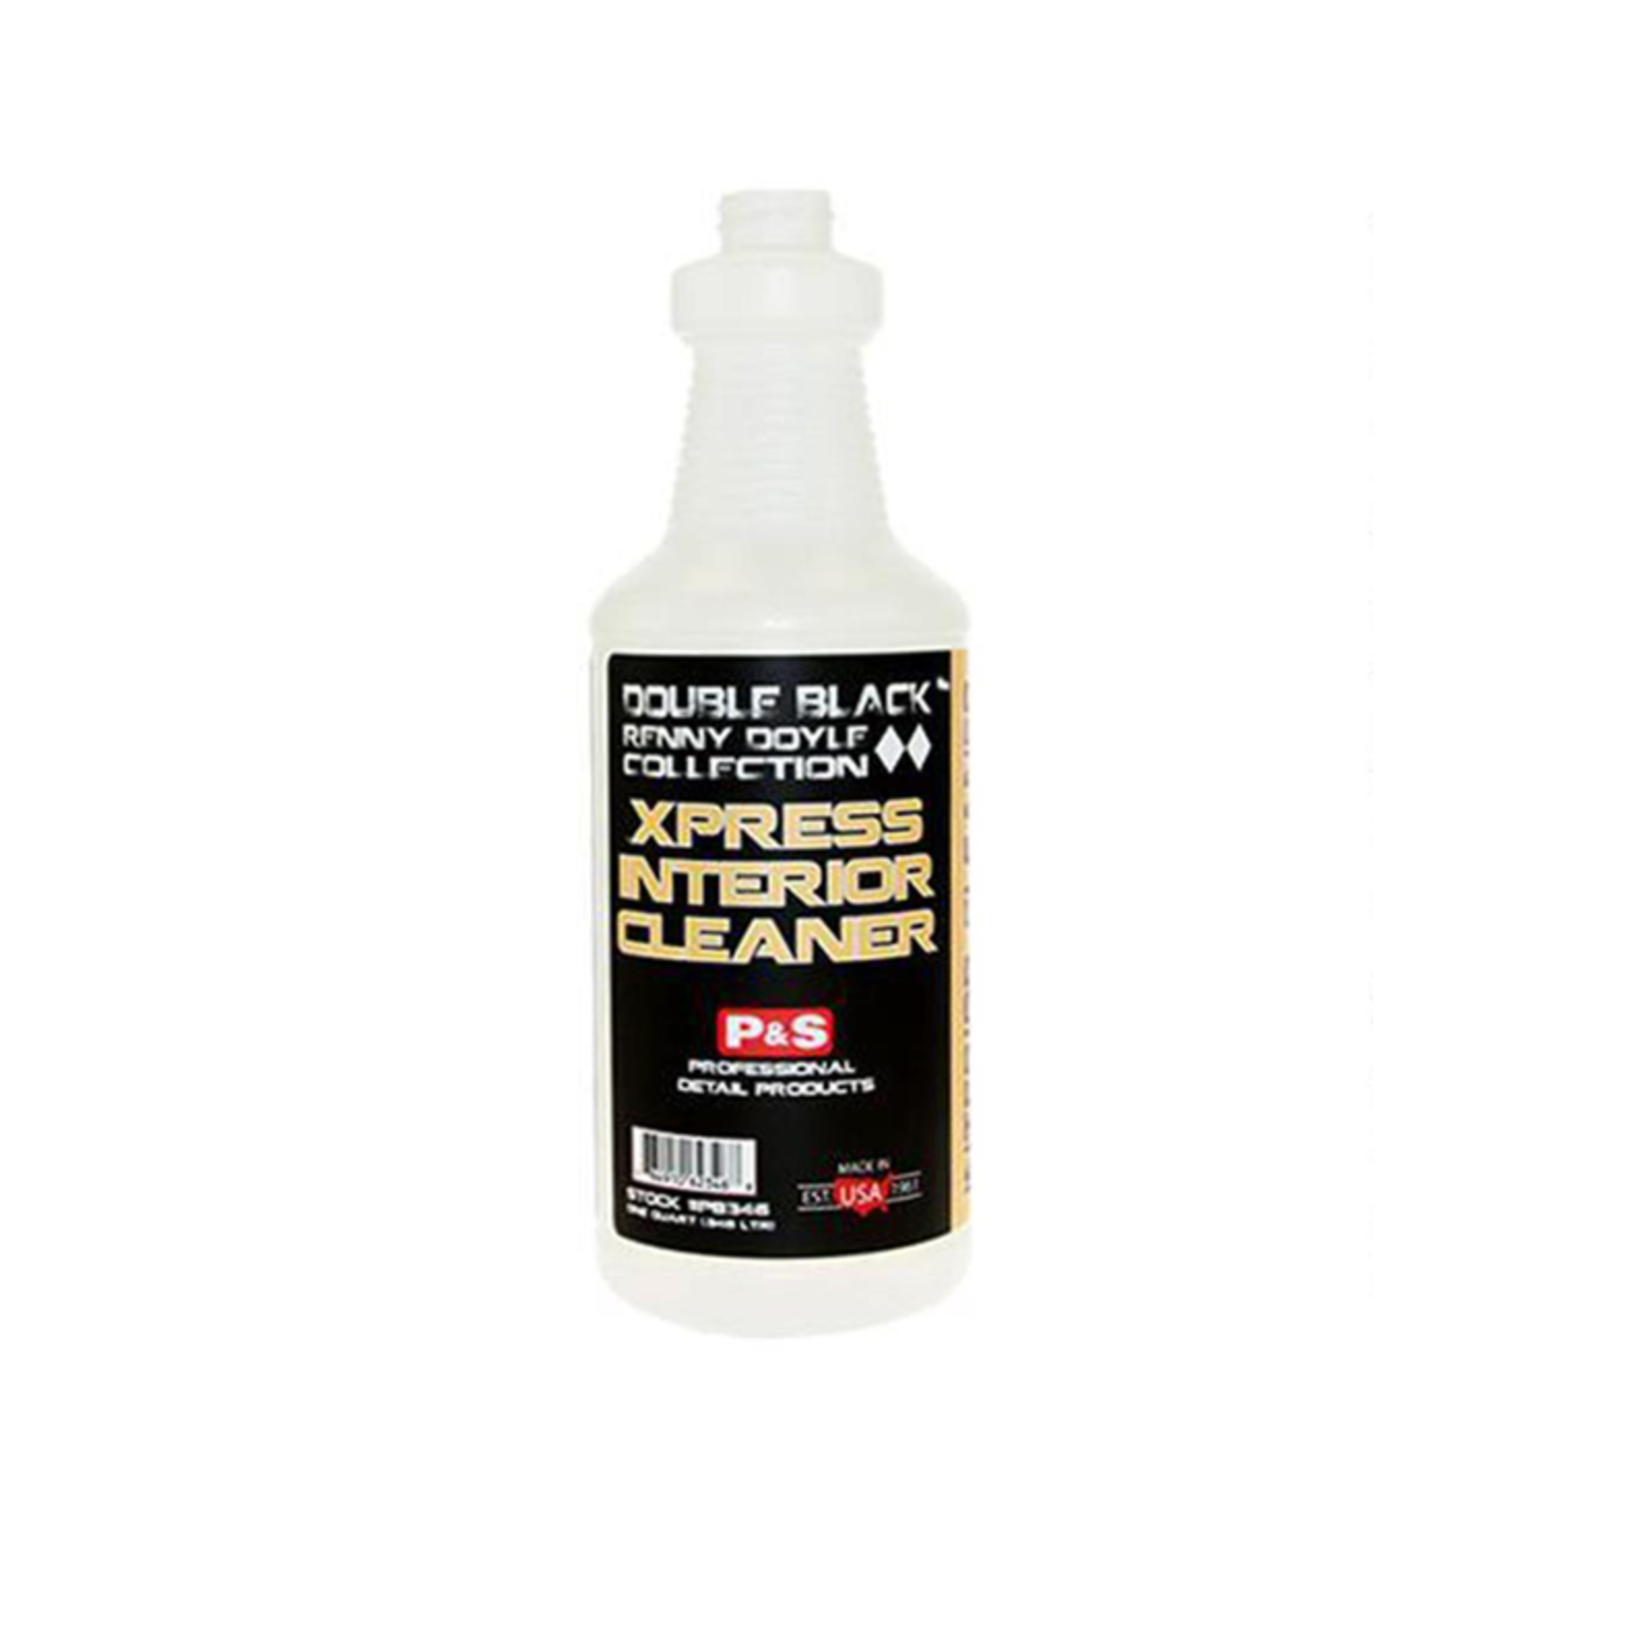 P&S Detail Products P&S Express Interior Cleaner Spray Bottles (32OZ)